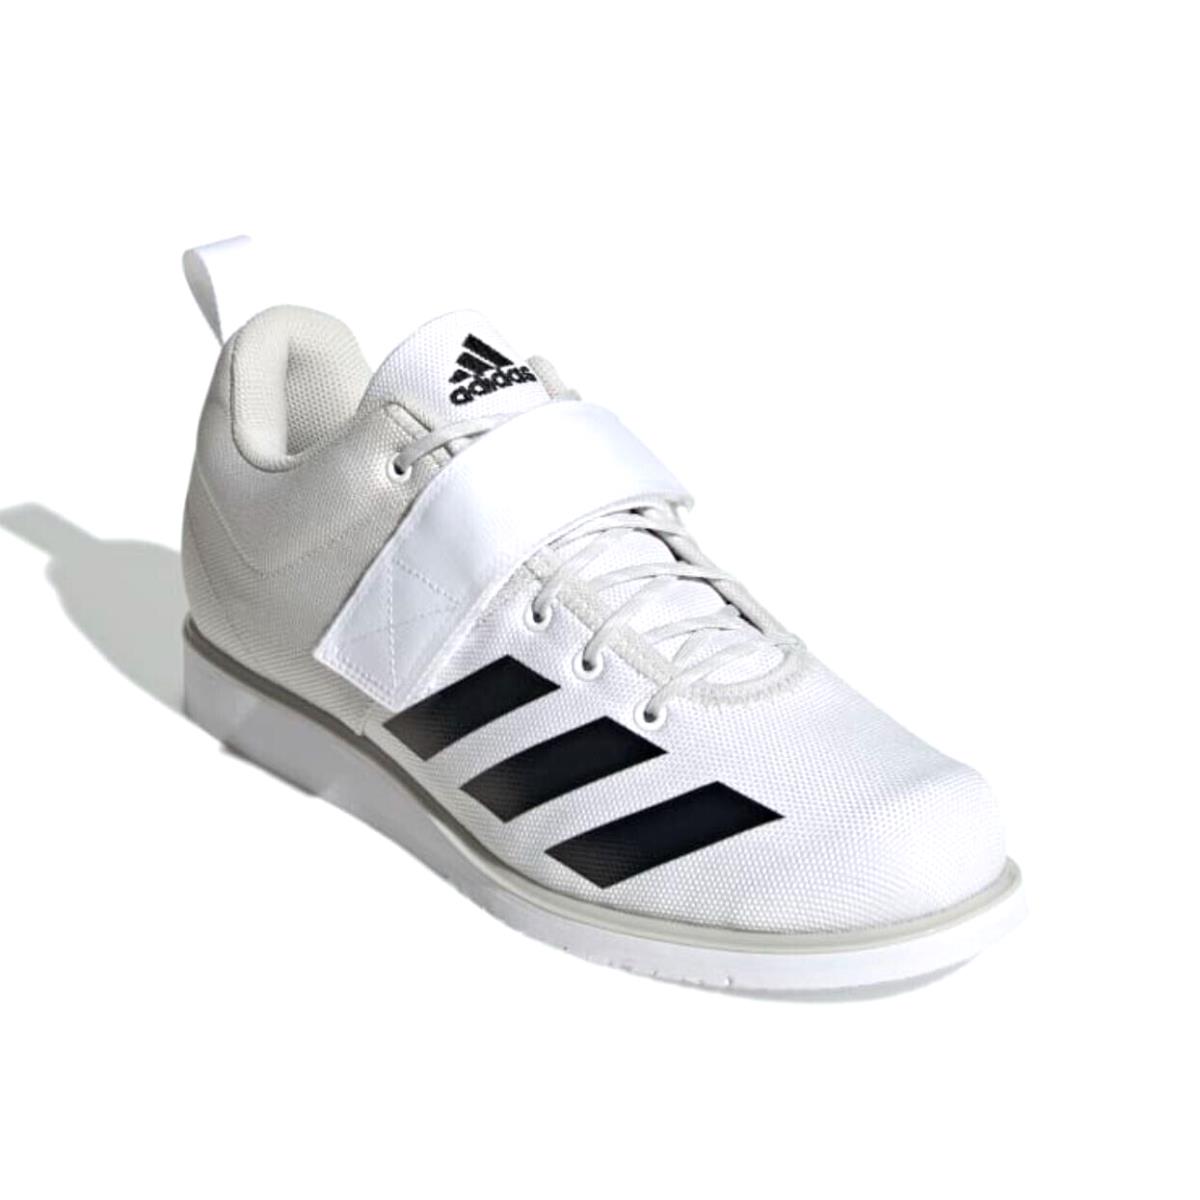 Mens Adidas Powerlift 4 Weightlifting Shoes Size US 10 GZ5871